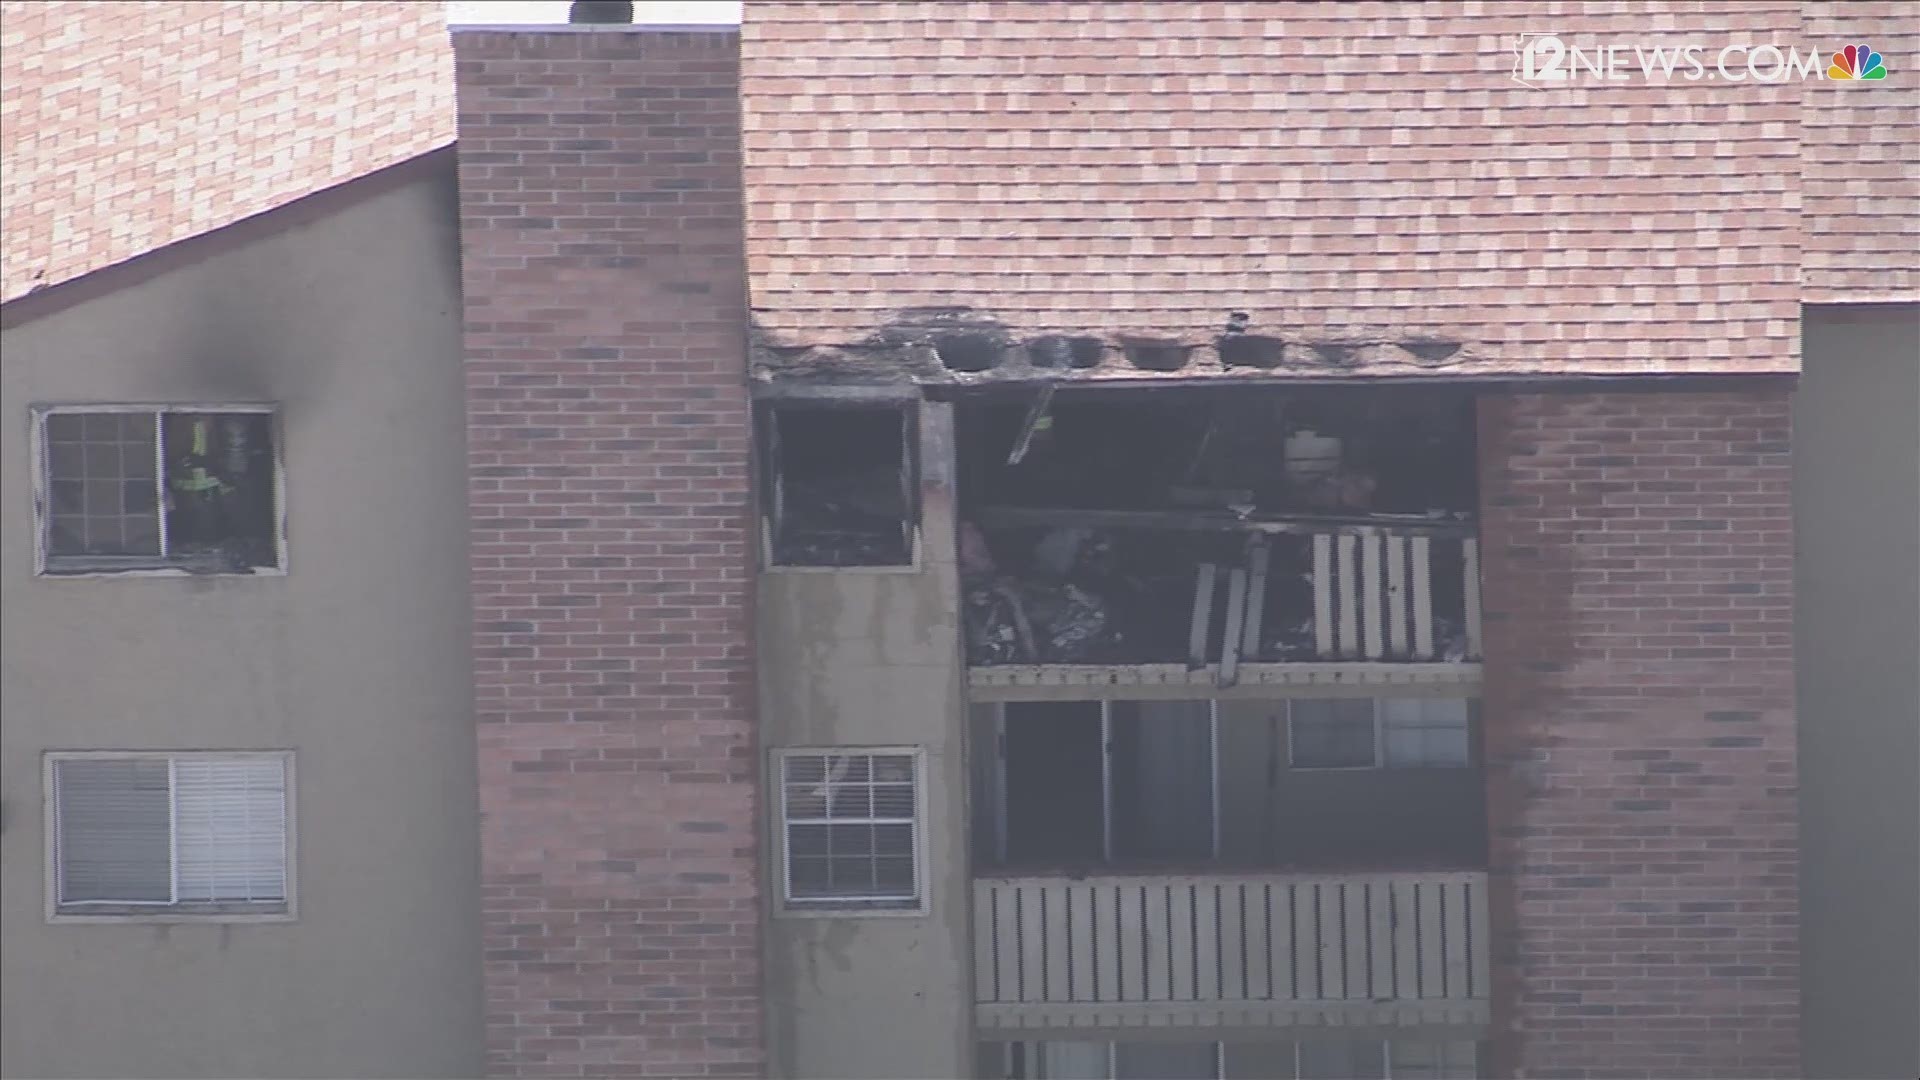 The Phoenix Fire Department said two children and one adult were taken to a local hospital with burn injuries after a fire broke out at an apartment on Friday.